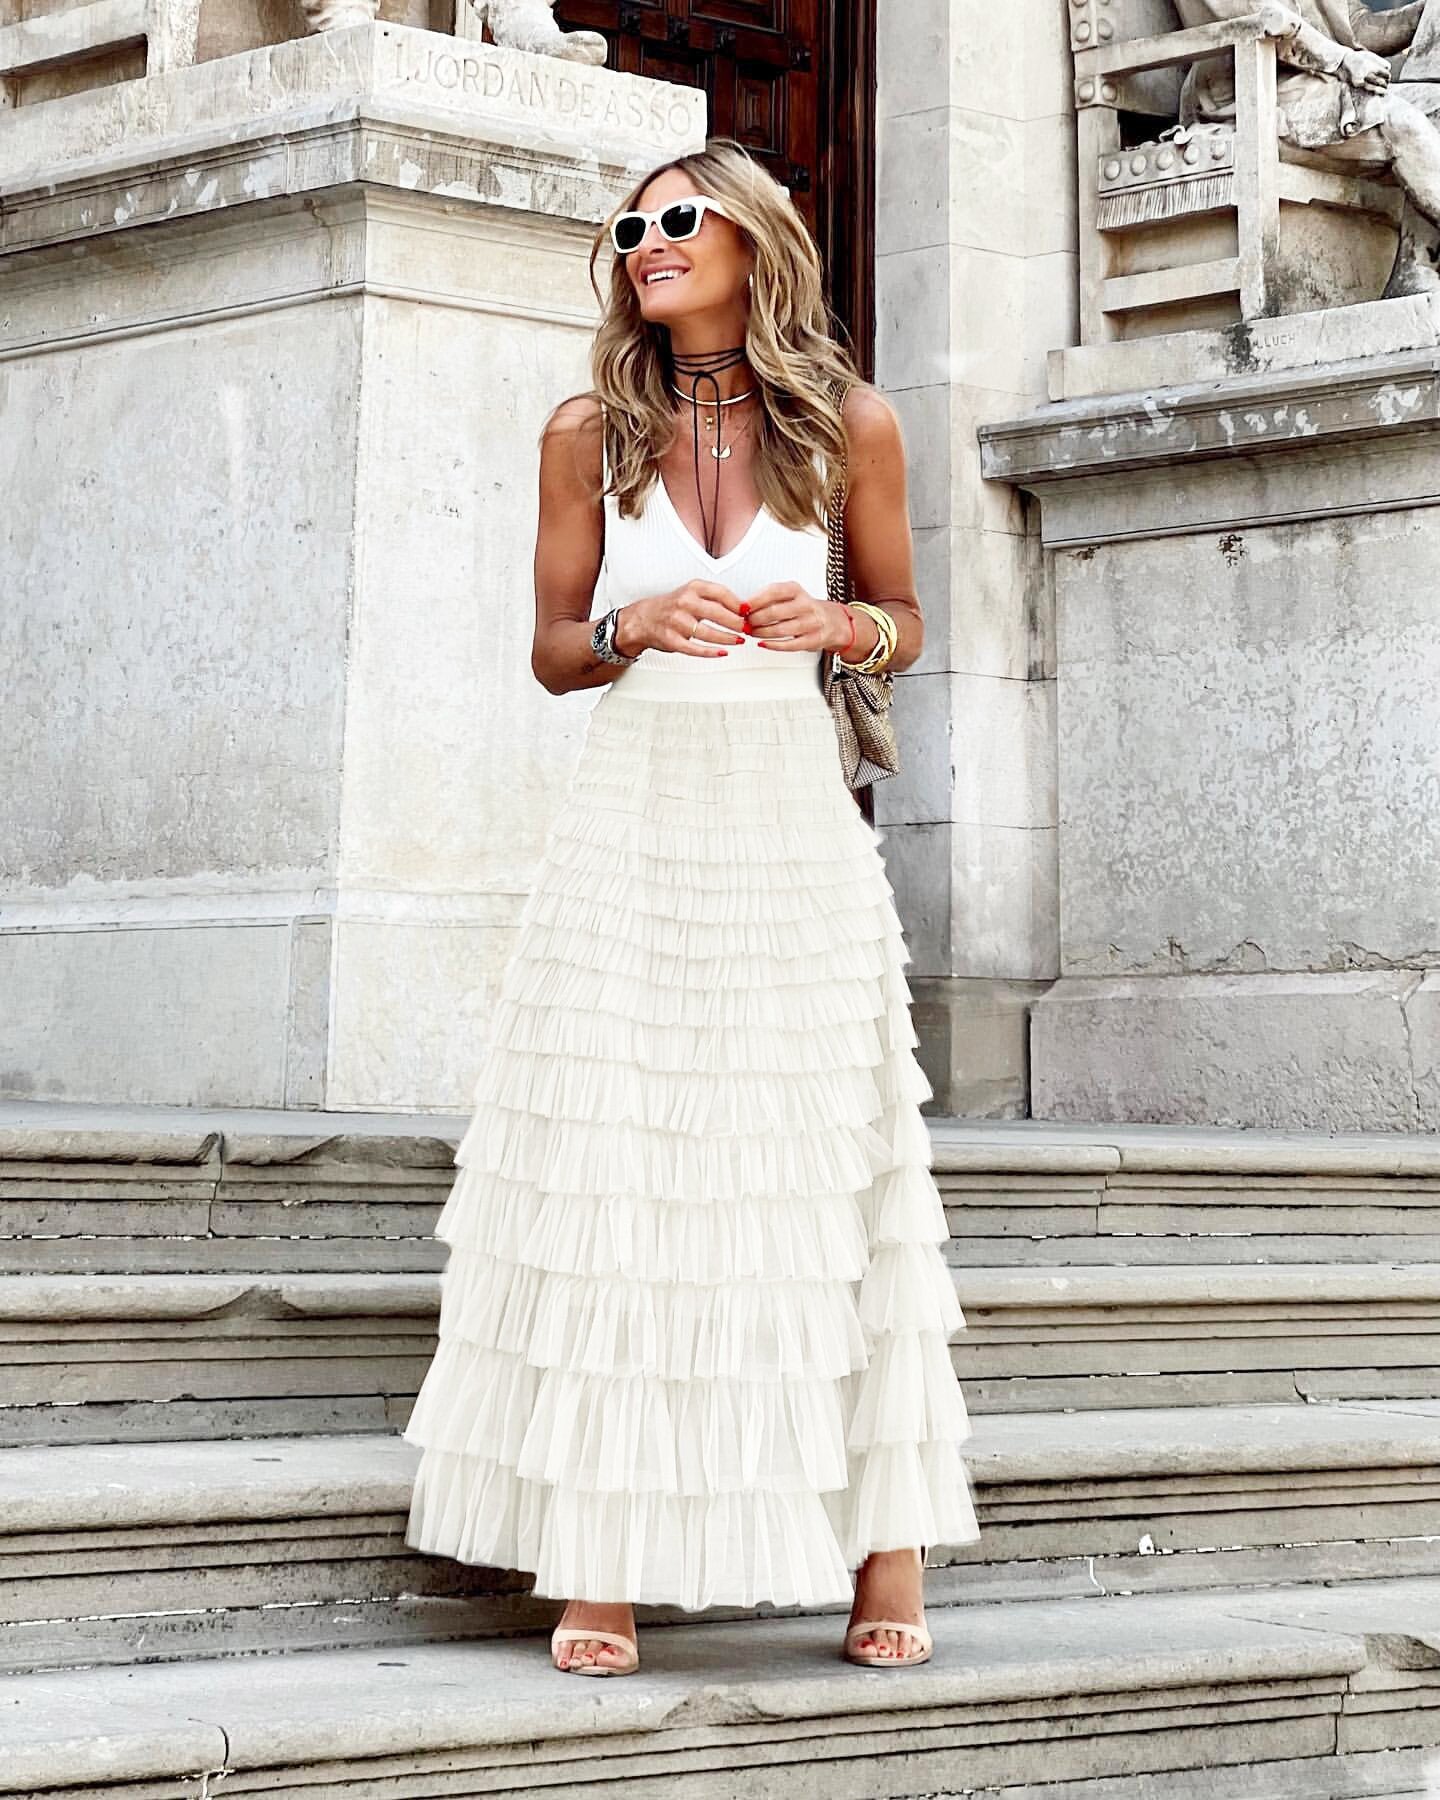 Women's Cool Summer Fashion Mesh Tiered Skirts